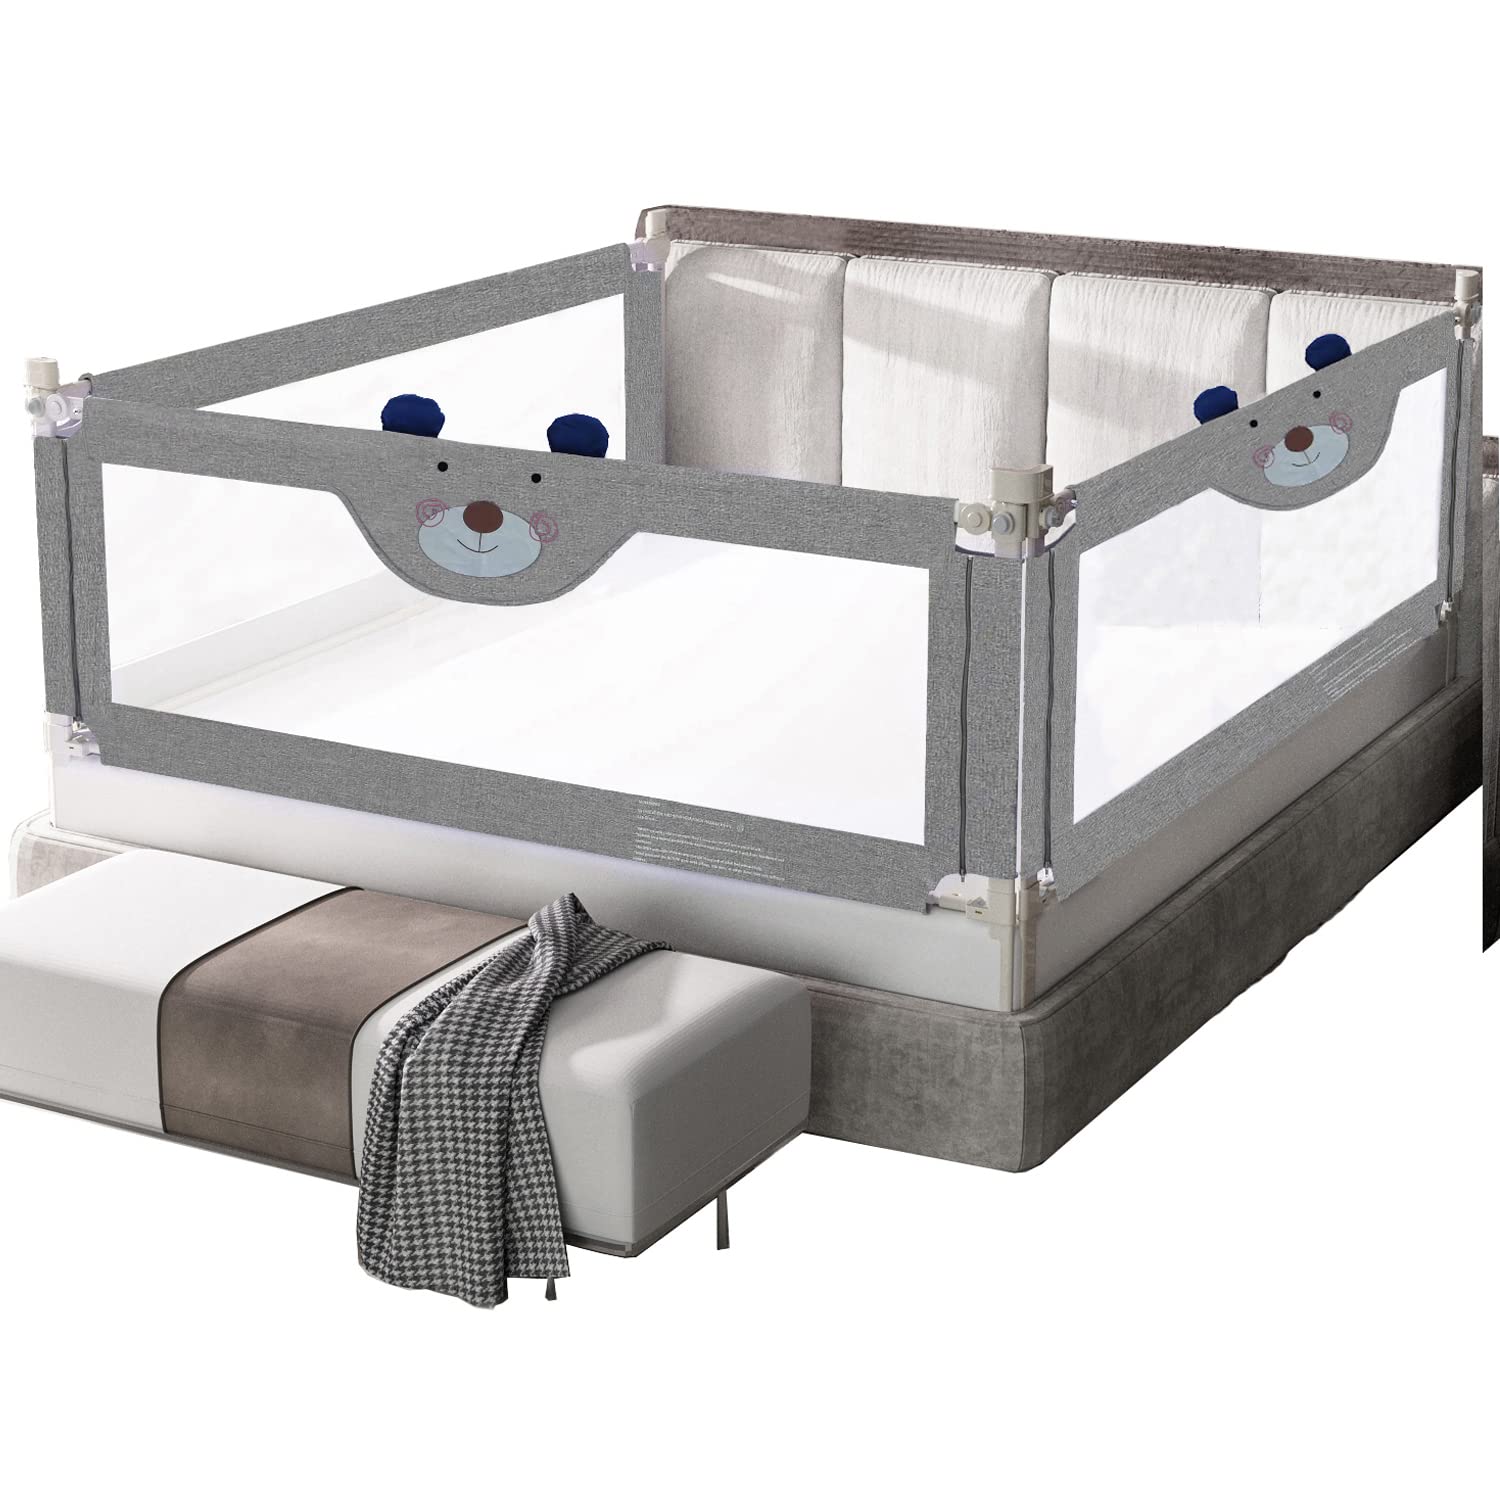 SYOO SINGYOO Bed Rails for Toddlers- New Upgraded Extra Long Bed